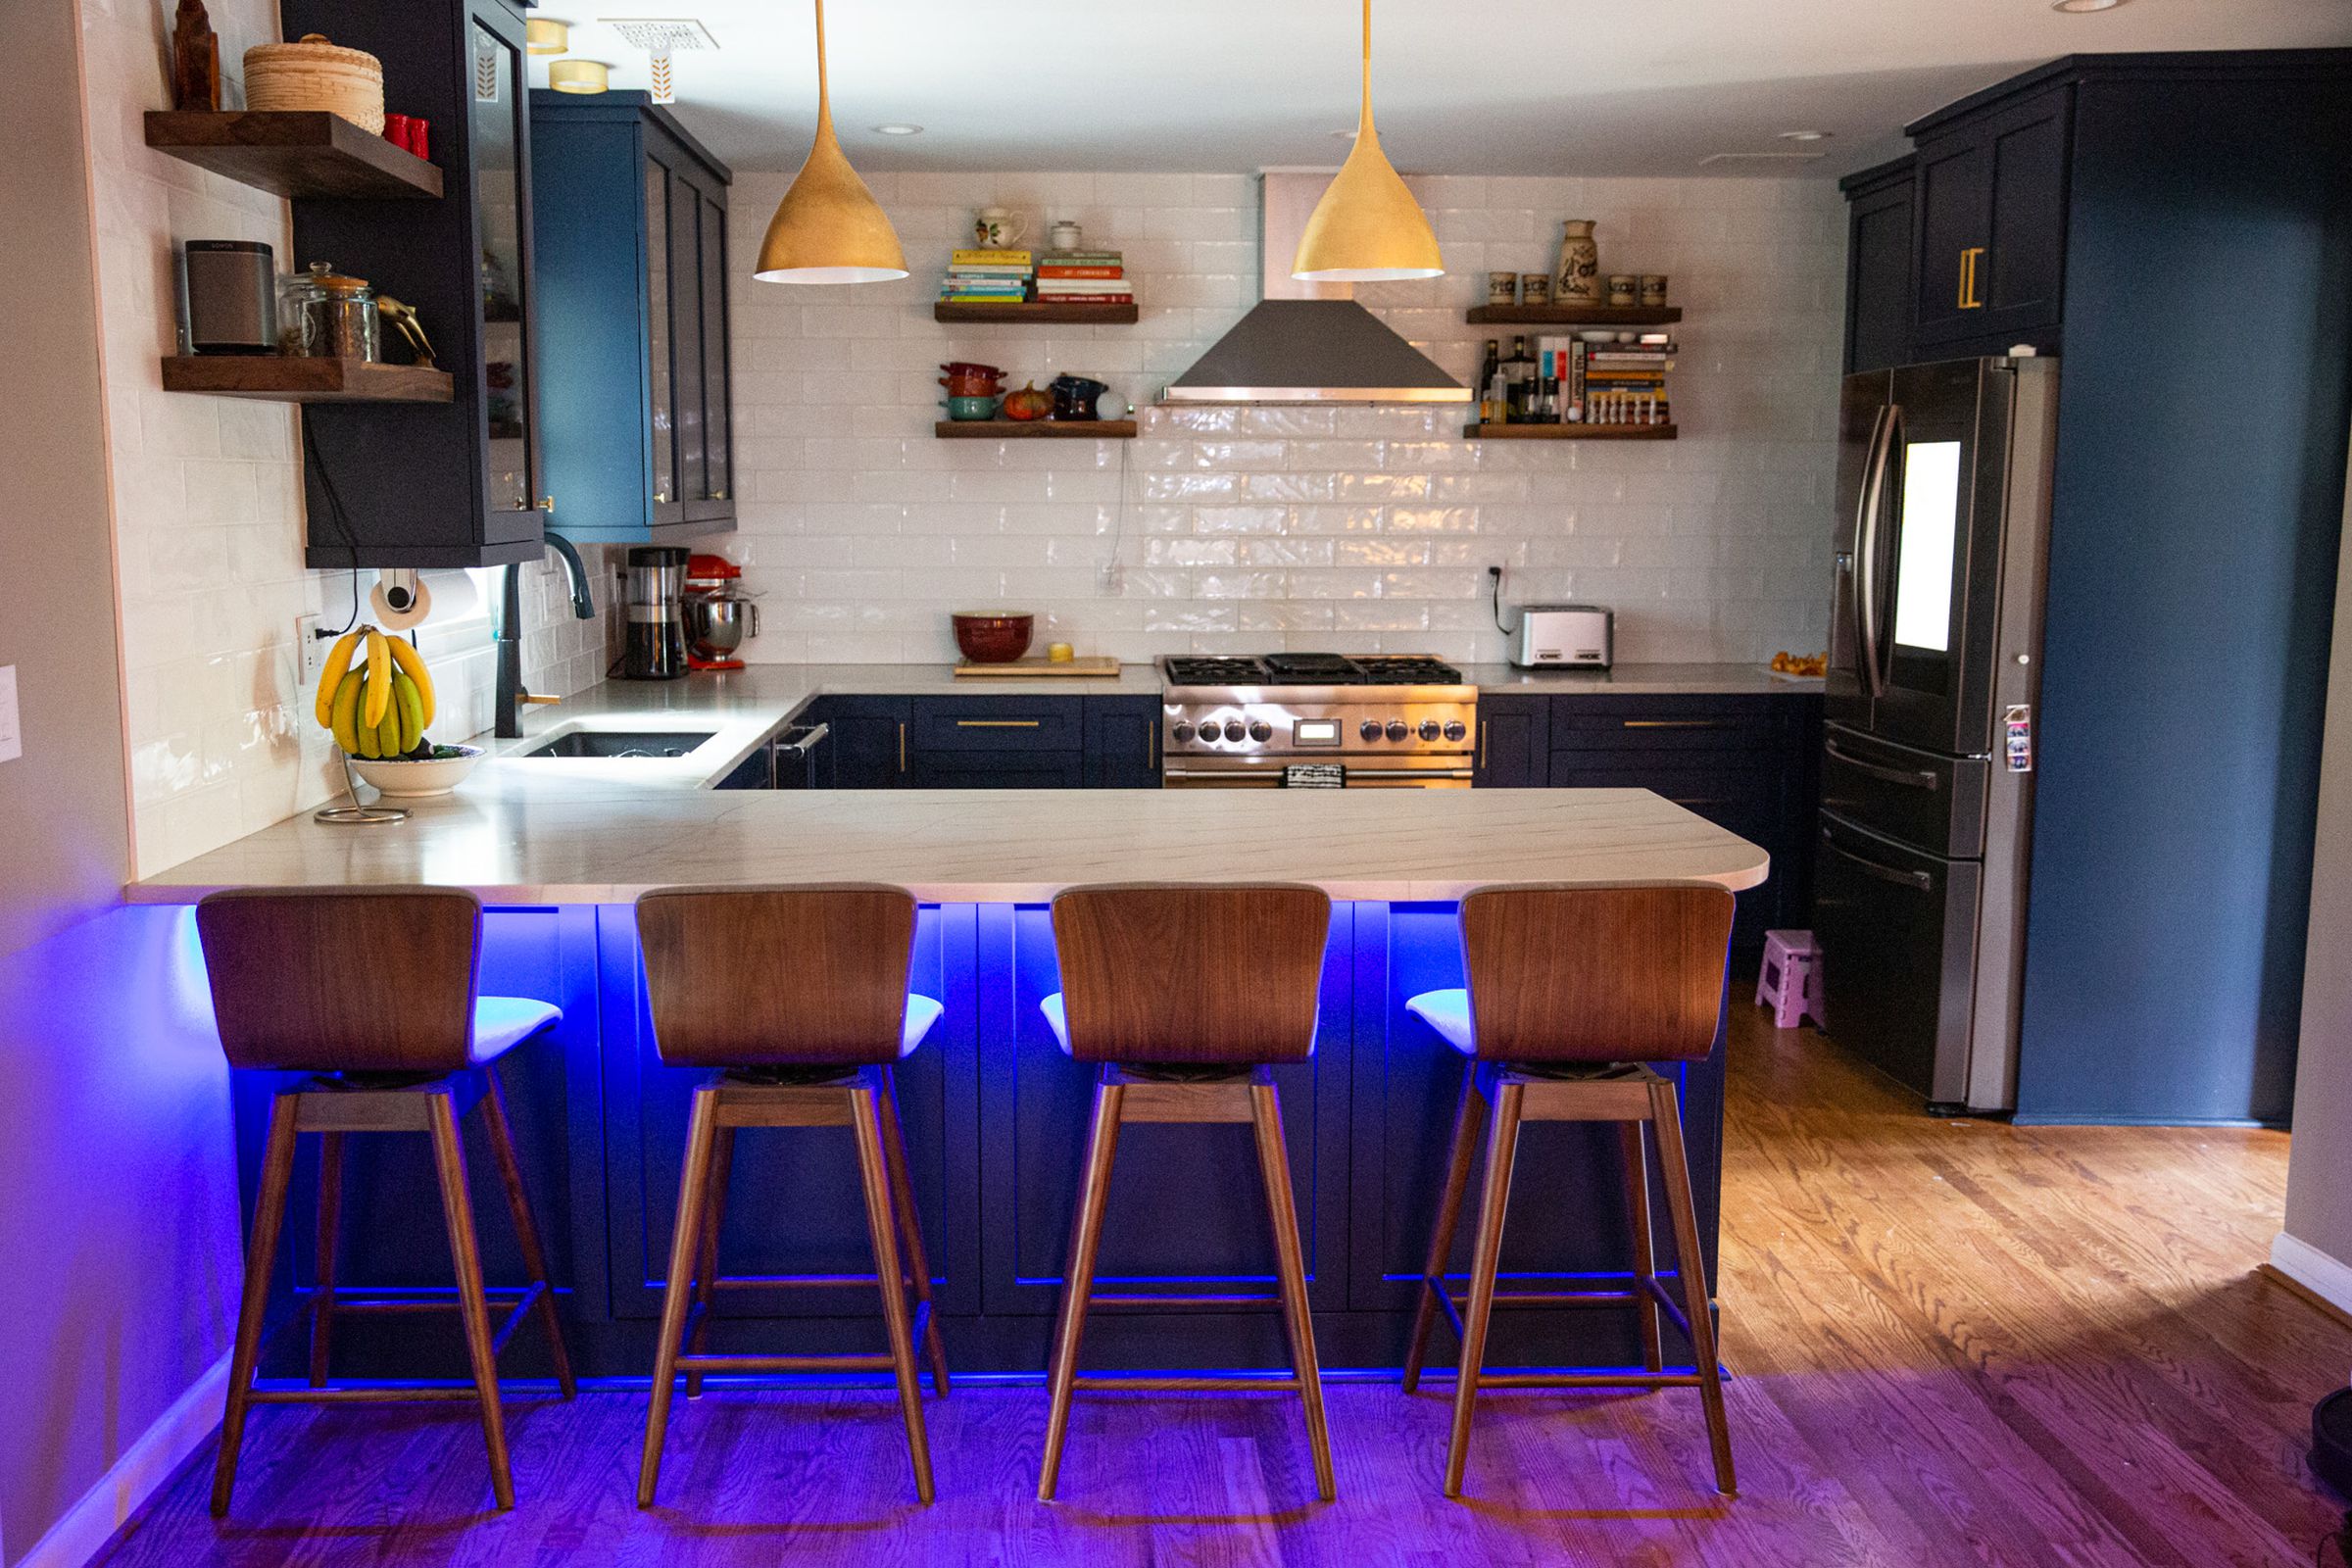 A kitchen island with blue lights